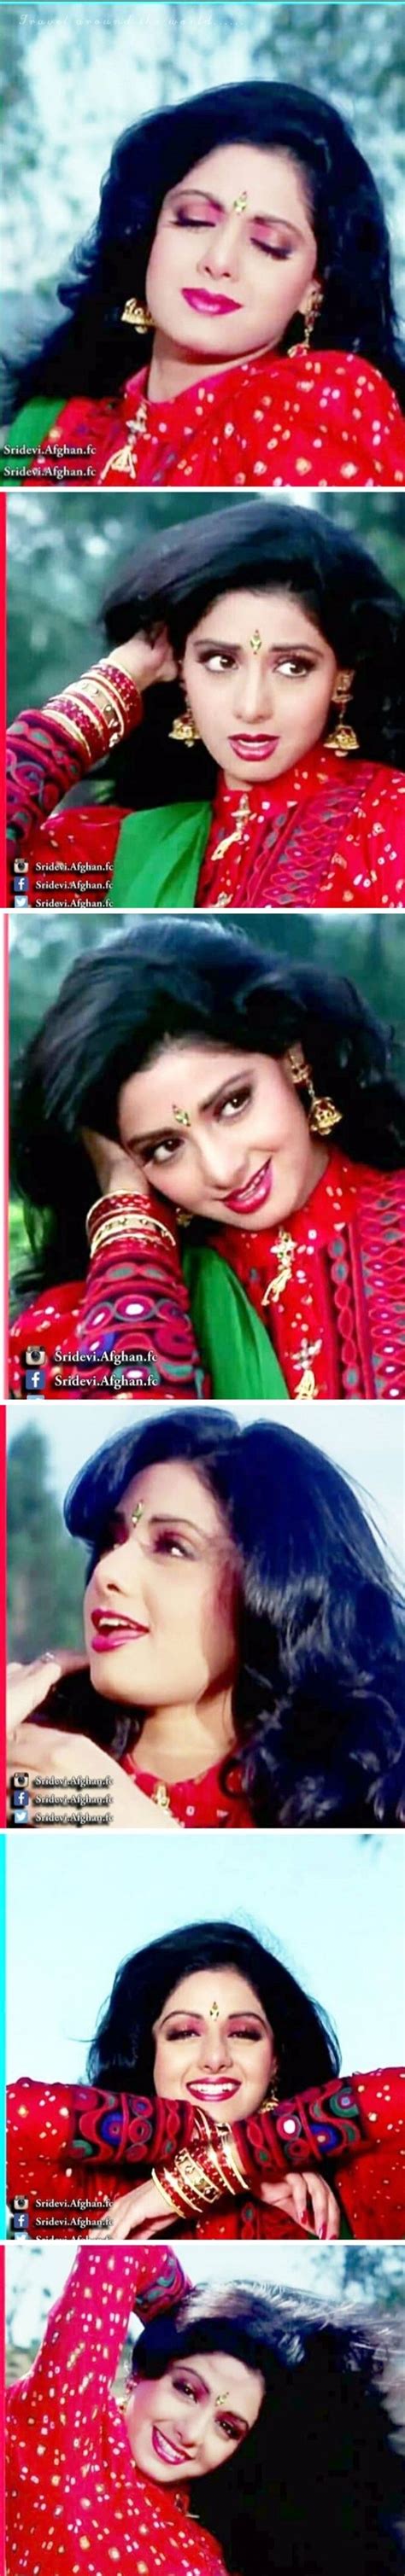 pin by deepak on sridevi s bollywood journey with images